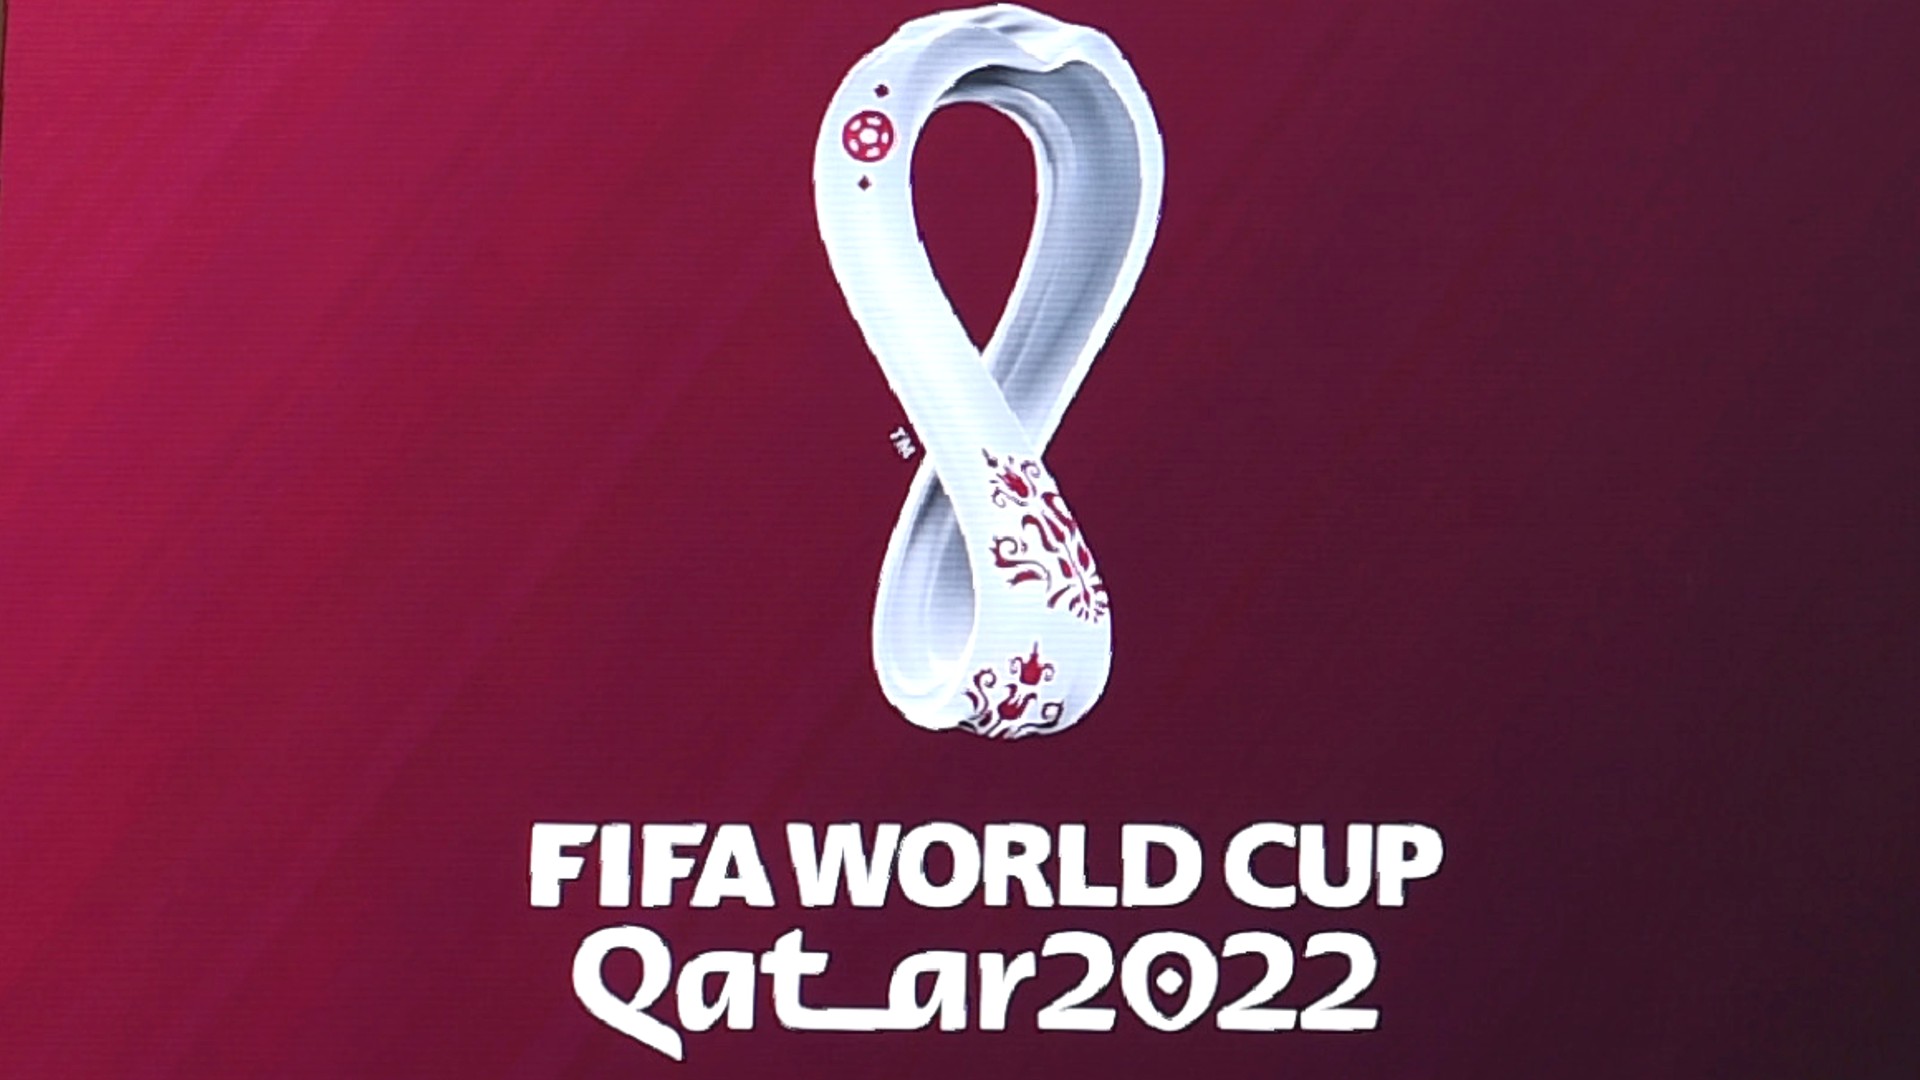 fifa-allows-teams-to--26-players-for-upcoming-world-cup-qatar-2022